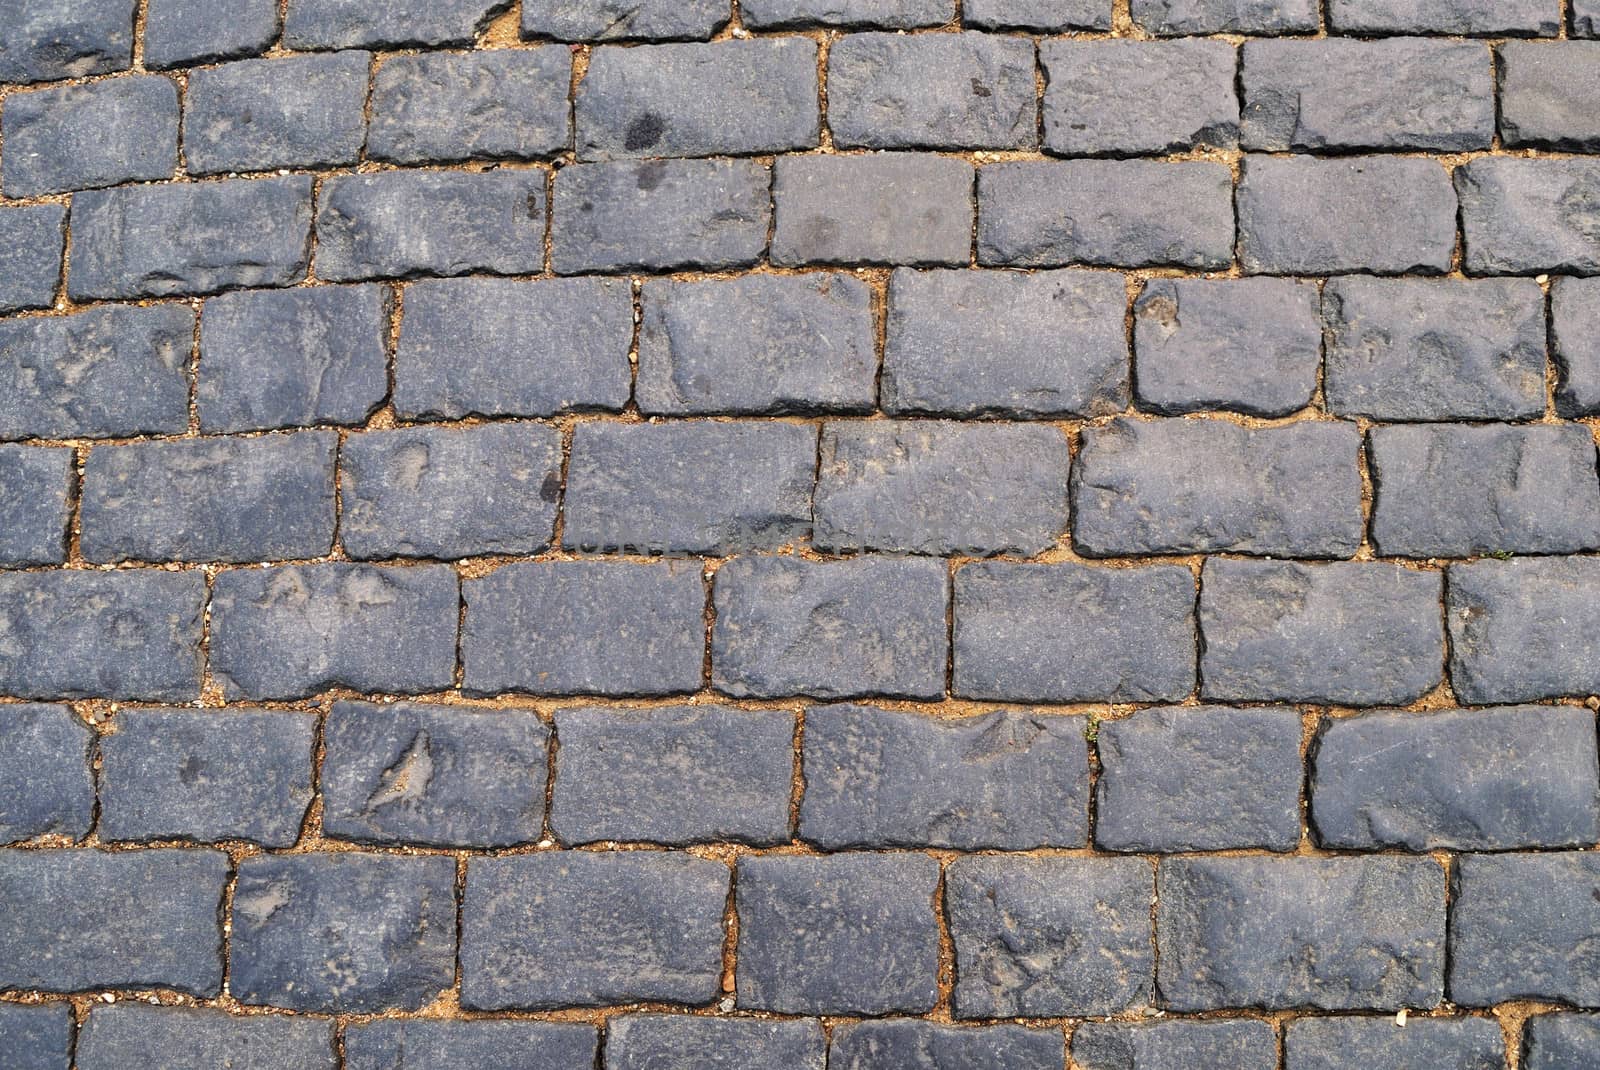 Fragment of old rough block pavement surface, Red Square in Moscow, Russia